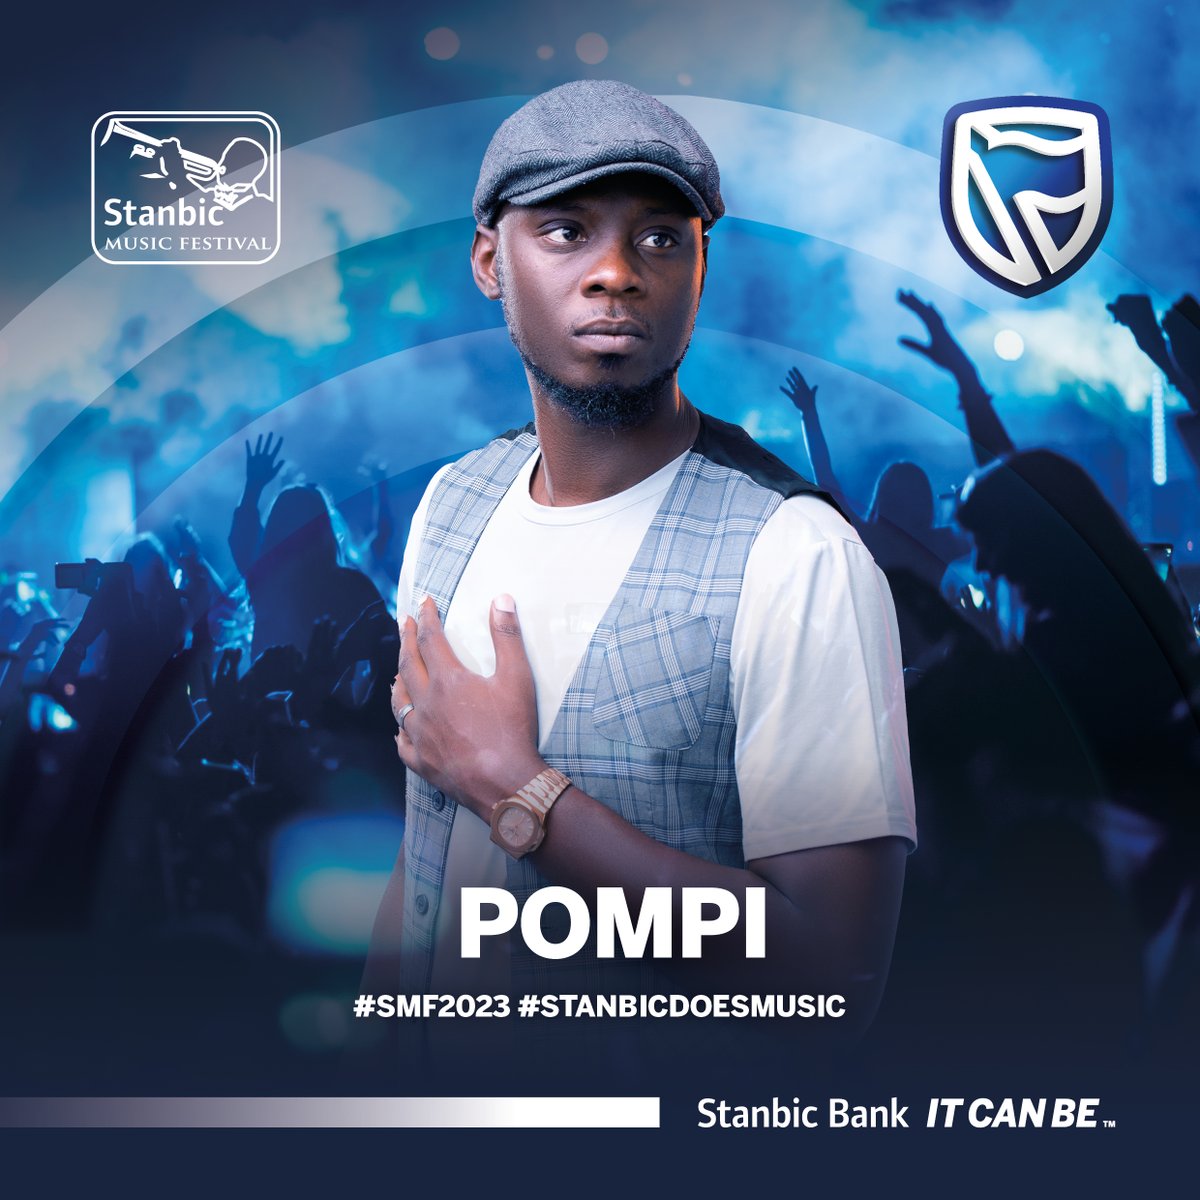 The African Eagle aka Pompi will grace the Stanbic Music Fest Friday, 13th October stage! Come and groove to Pole Pole to Giant Killer! #SMF2023 #StanbicDoesMusic #Pompi #ZambianMusic #LivePerformance #LocalTalent